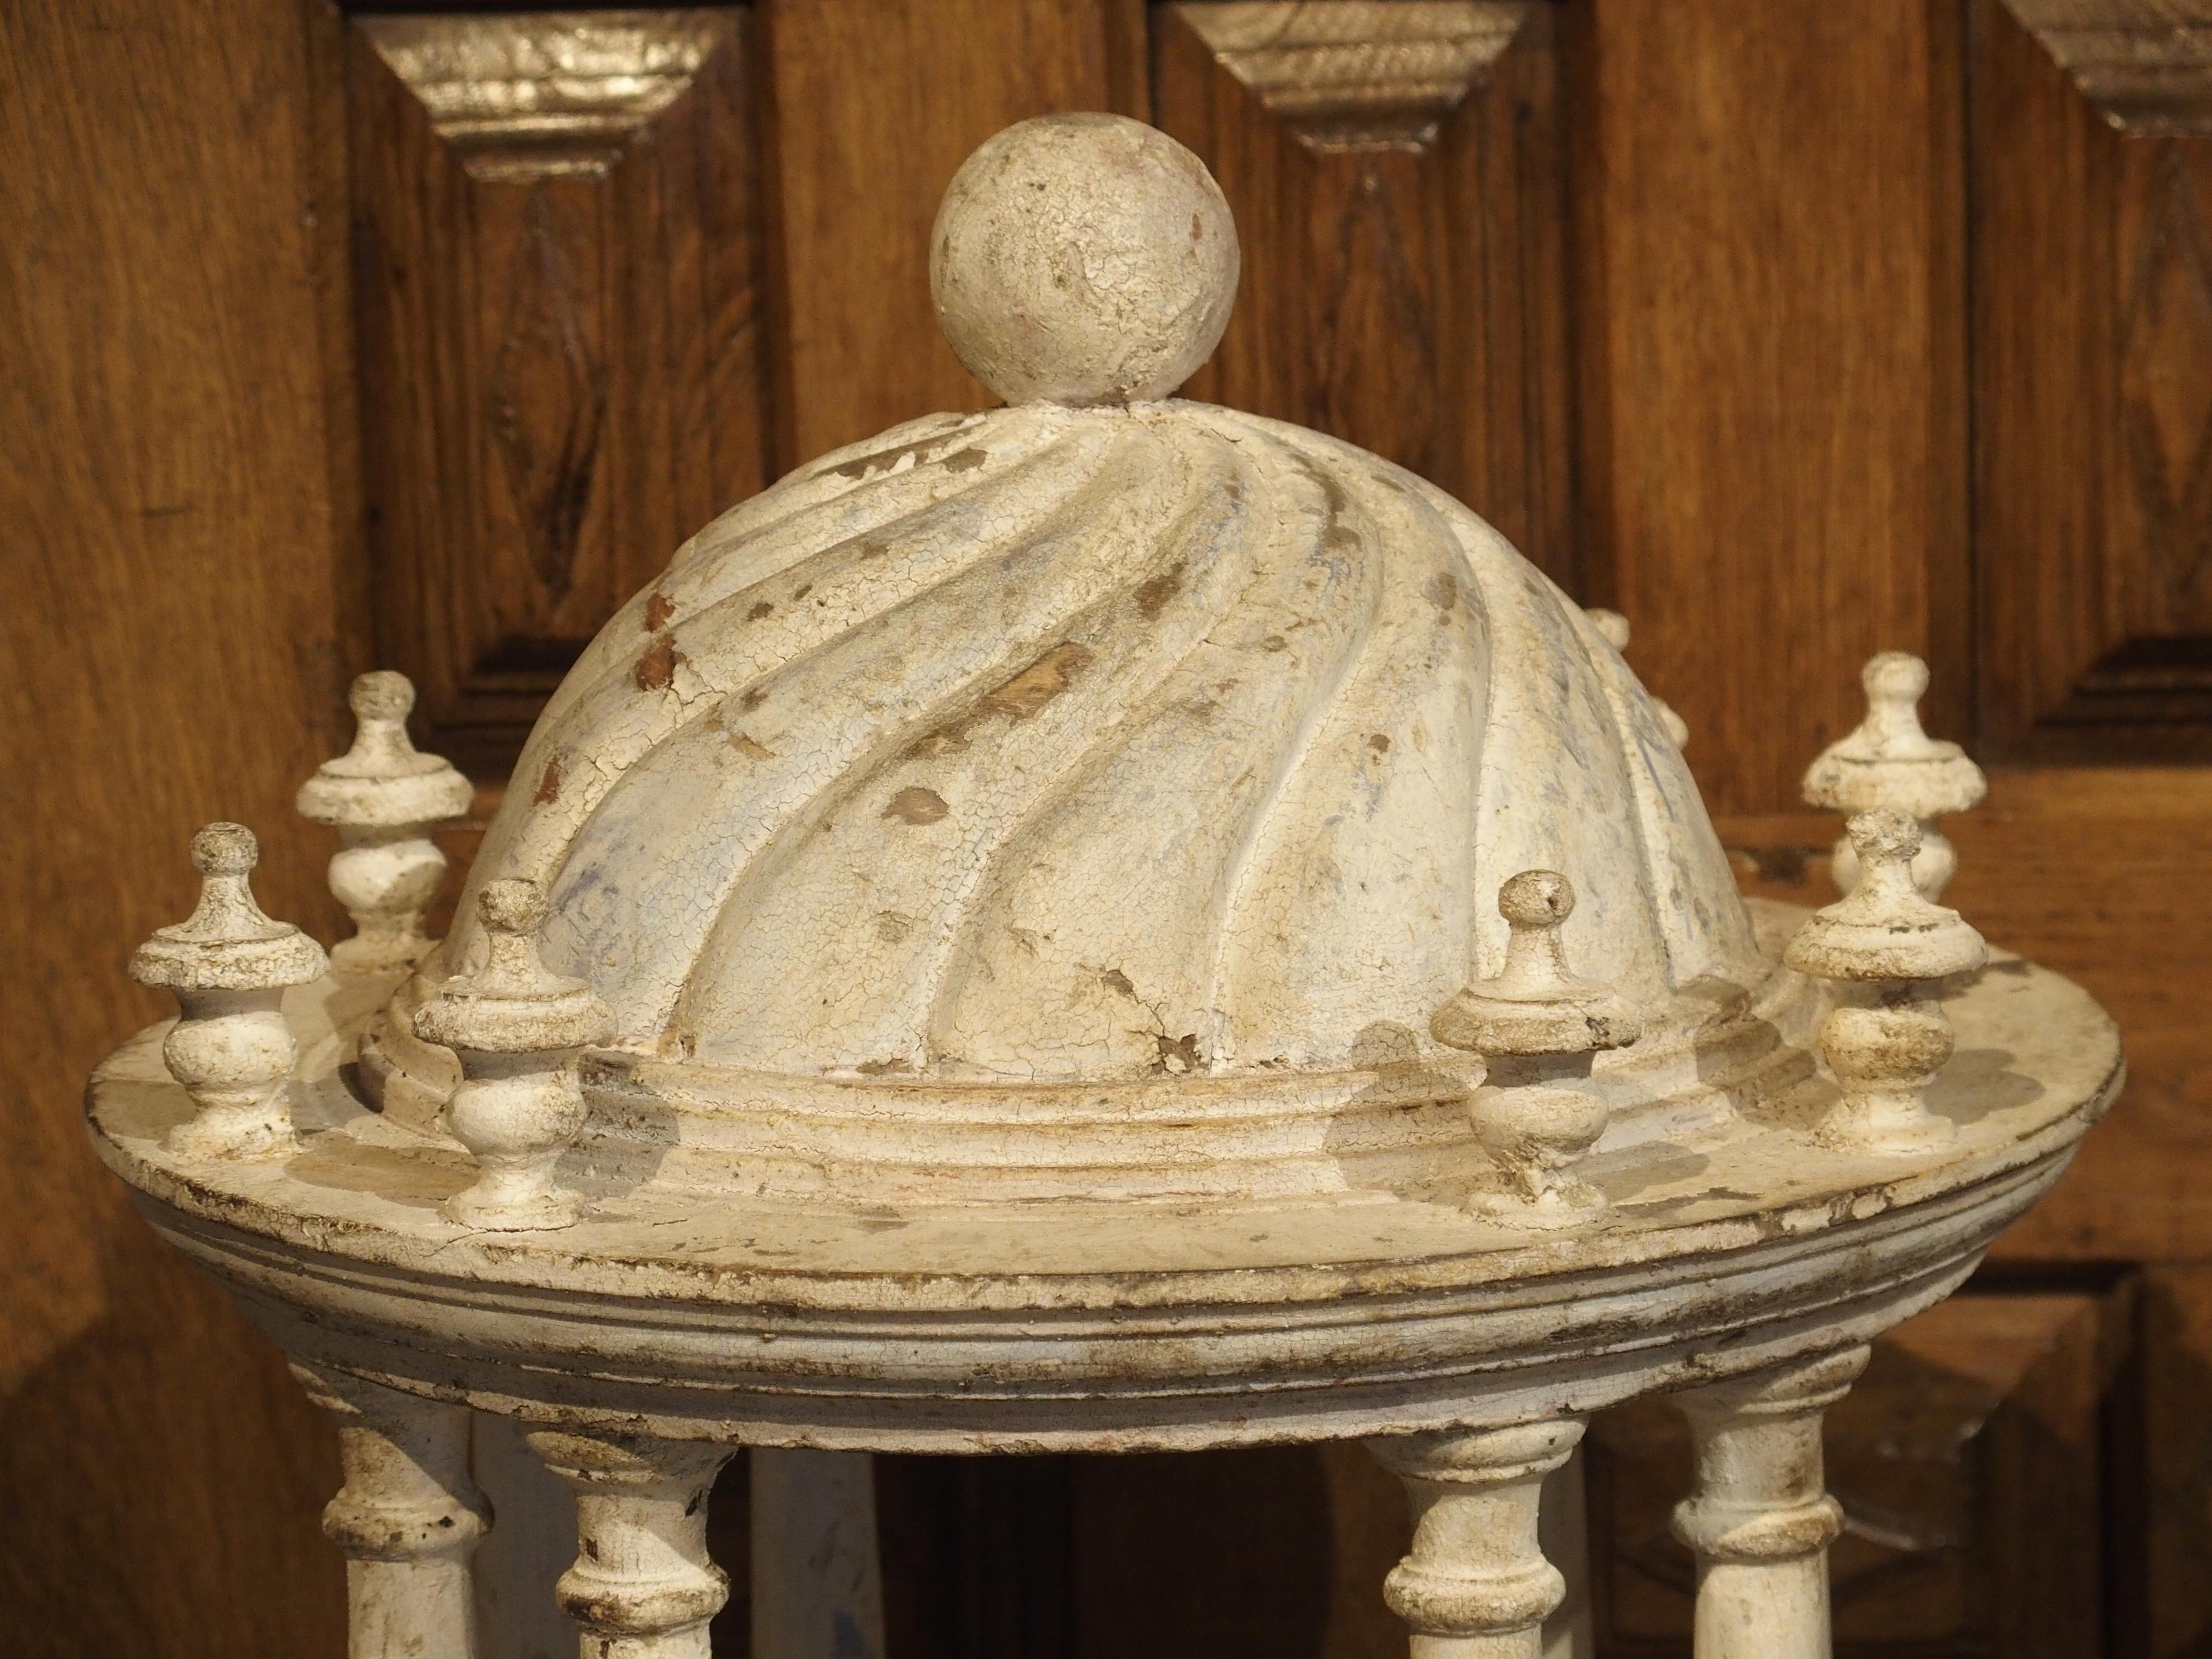 These parcel paint Italian colonnades are almost identical, except for their roof motifs and finials. One has a swirling design with a ball finial and the other has linear half rounds with a pine cone finial. Each has the same eight pillar